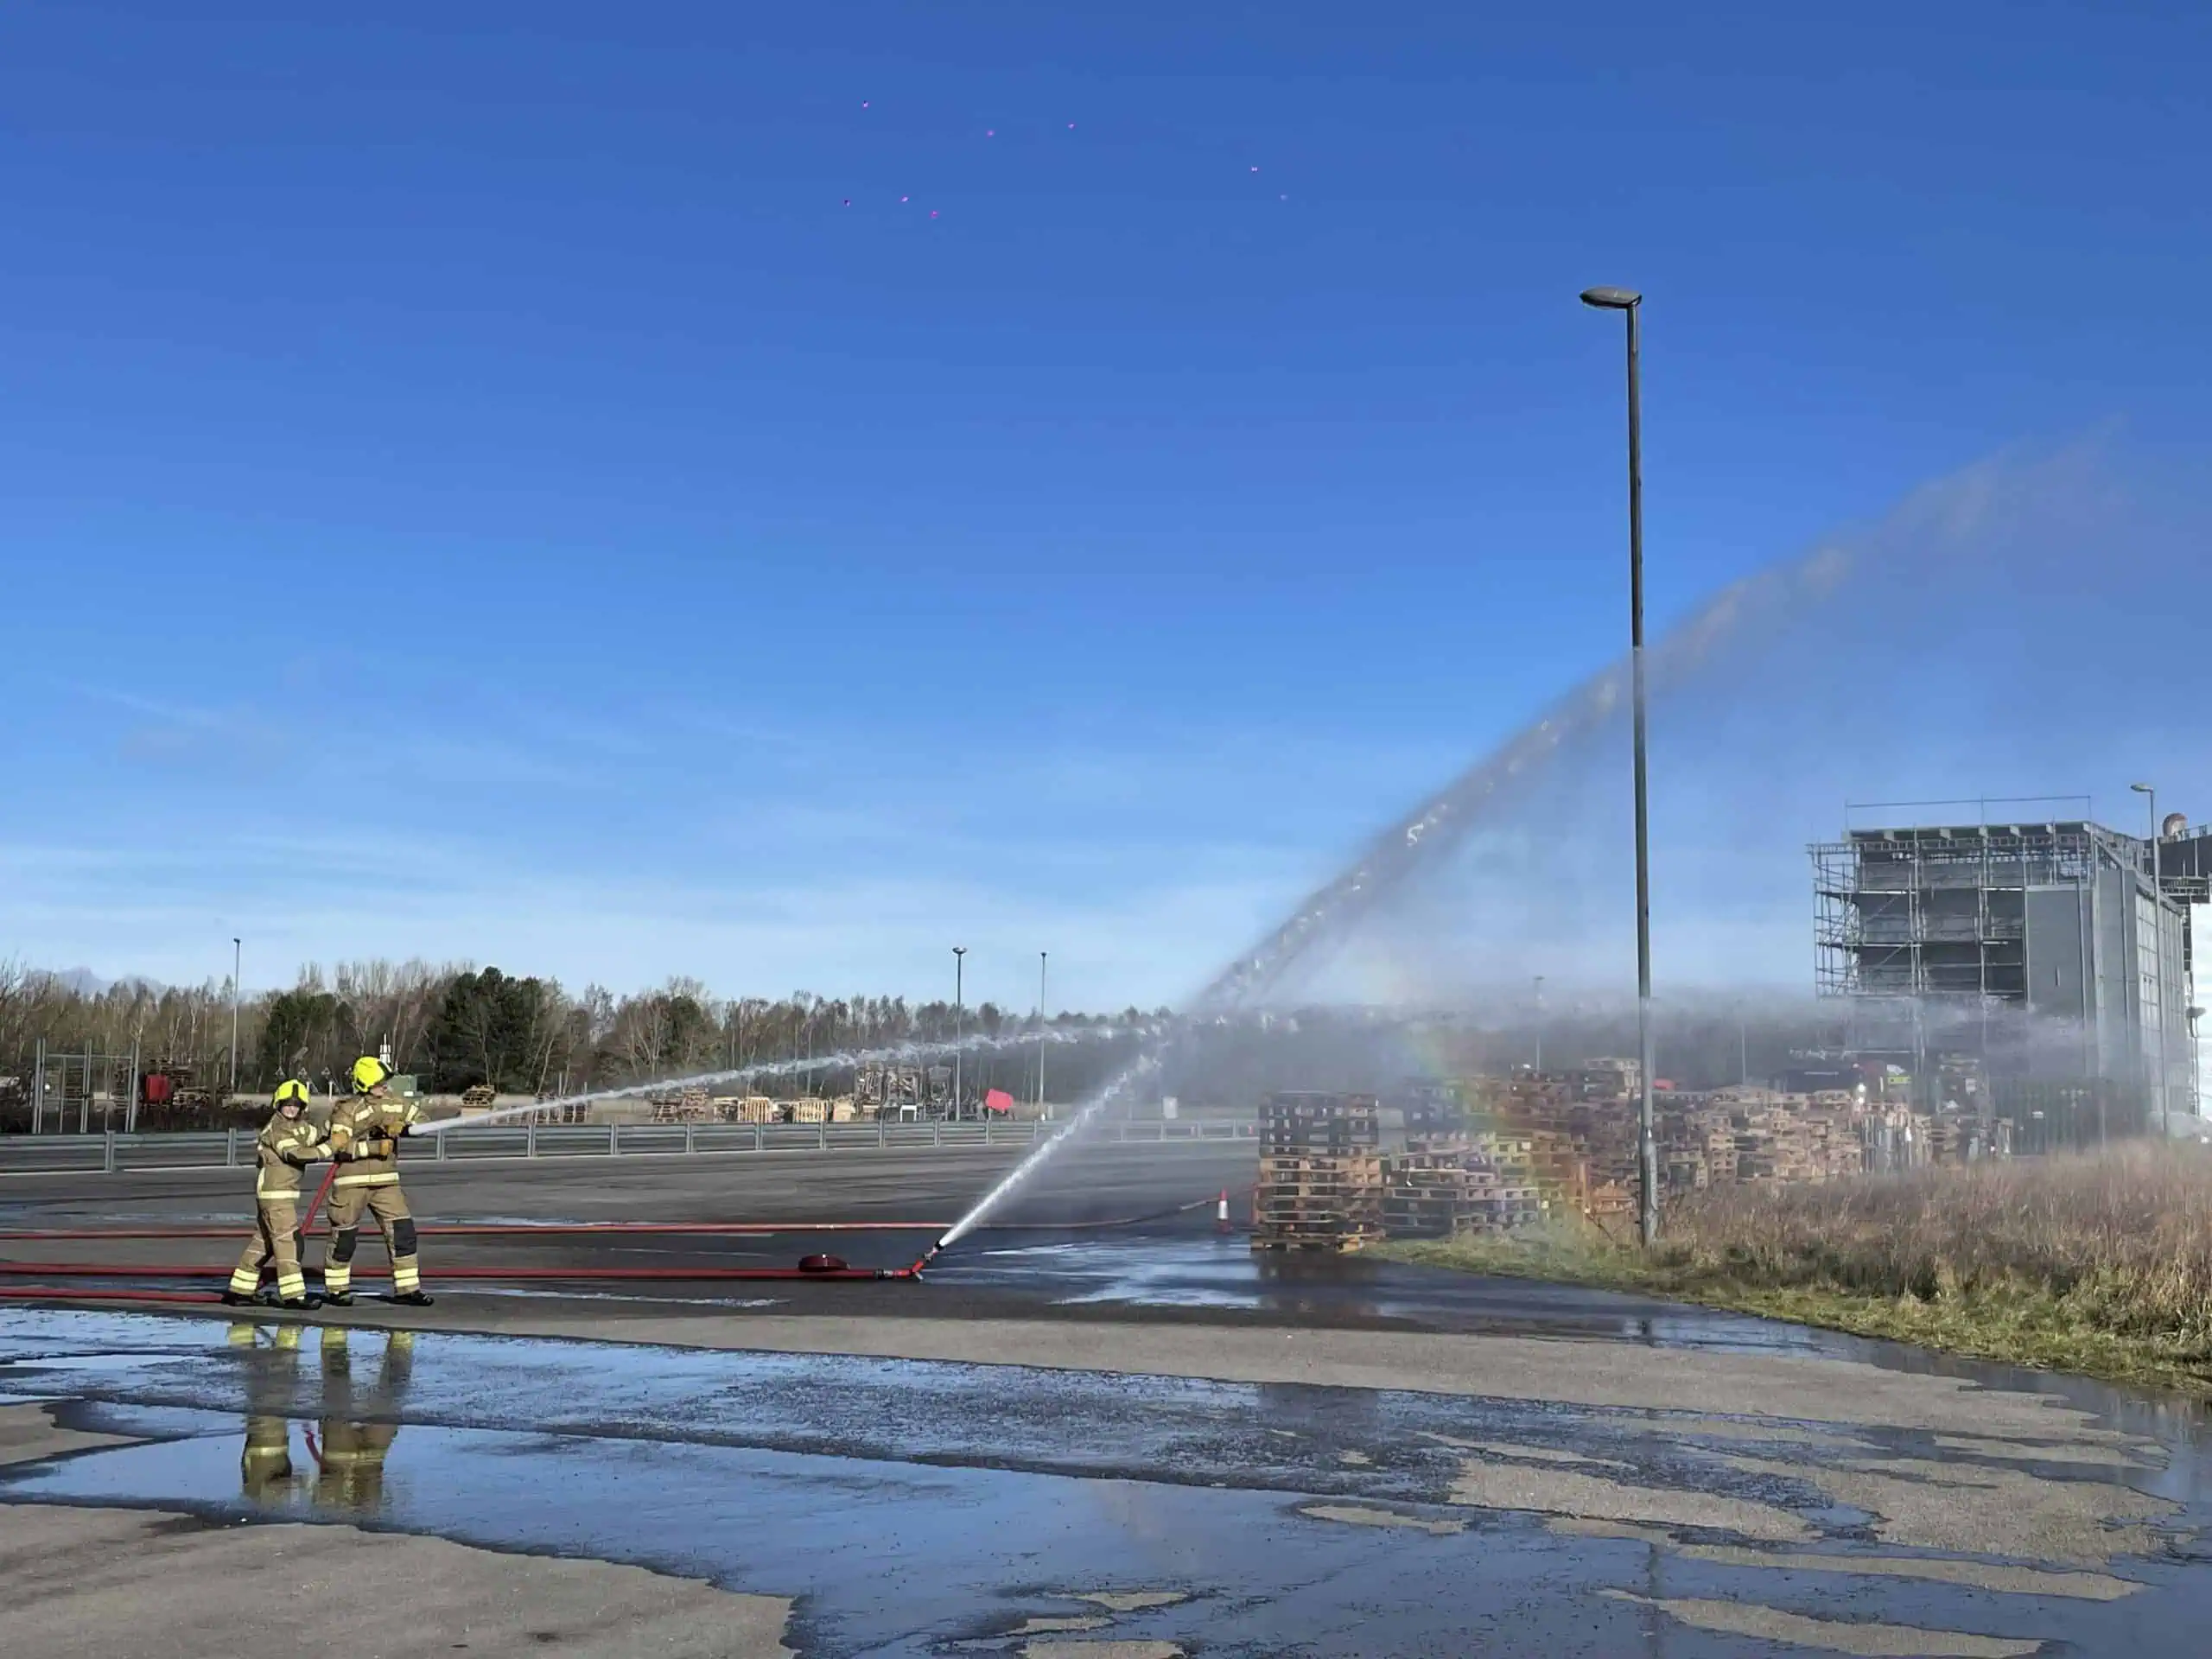 Firefighters spraying water during a training exercise